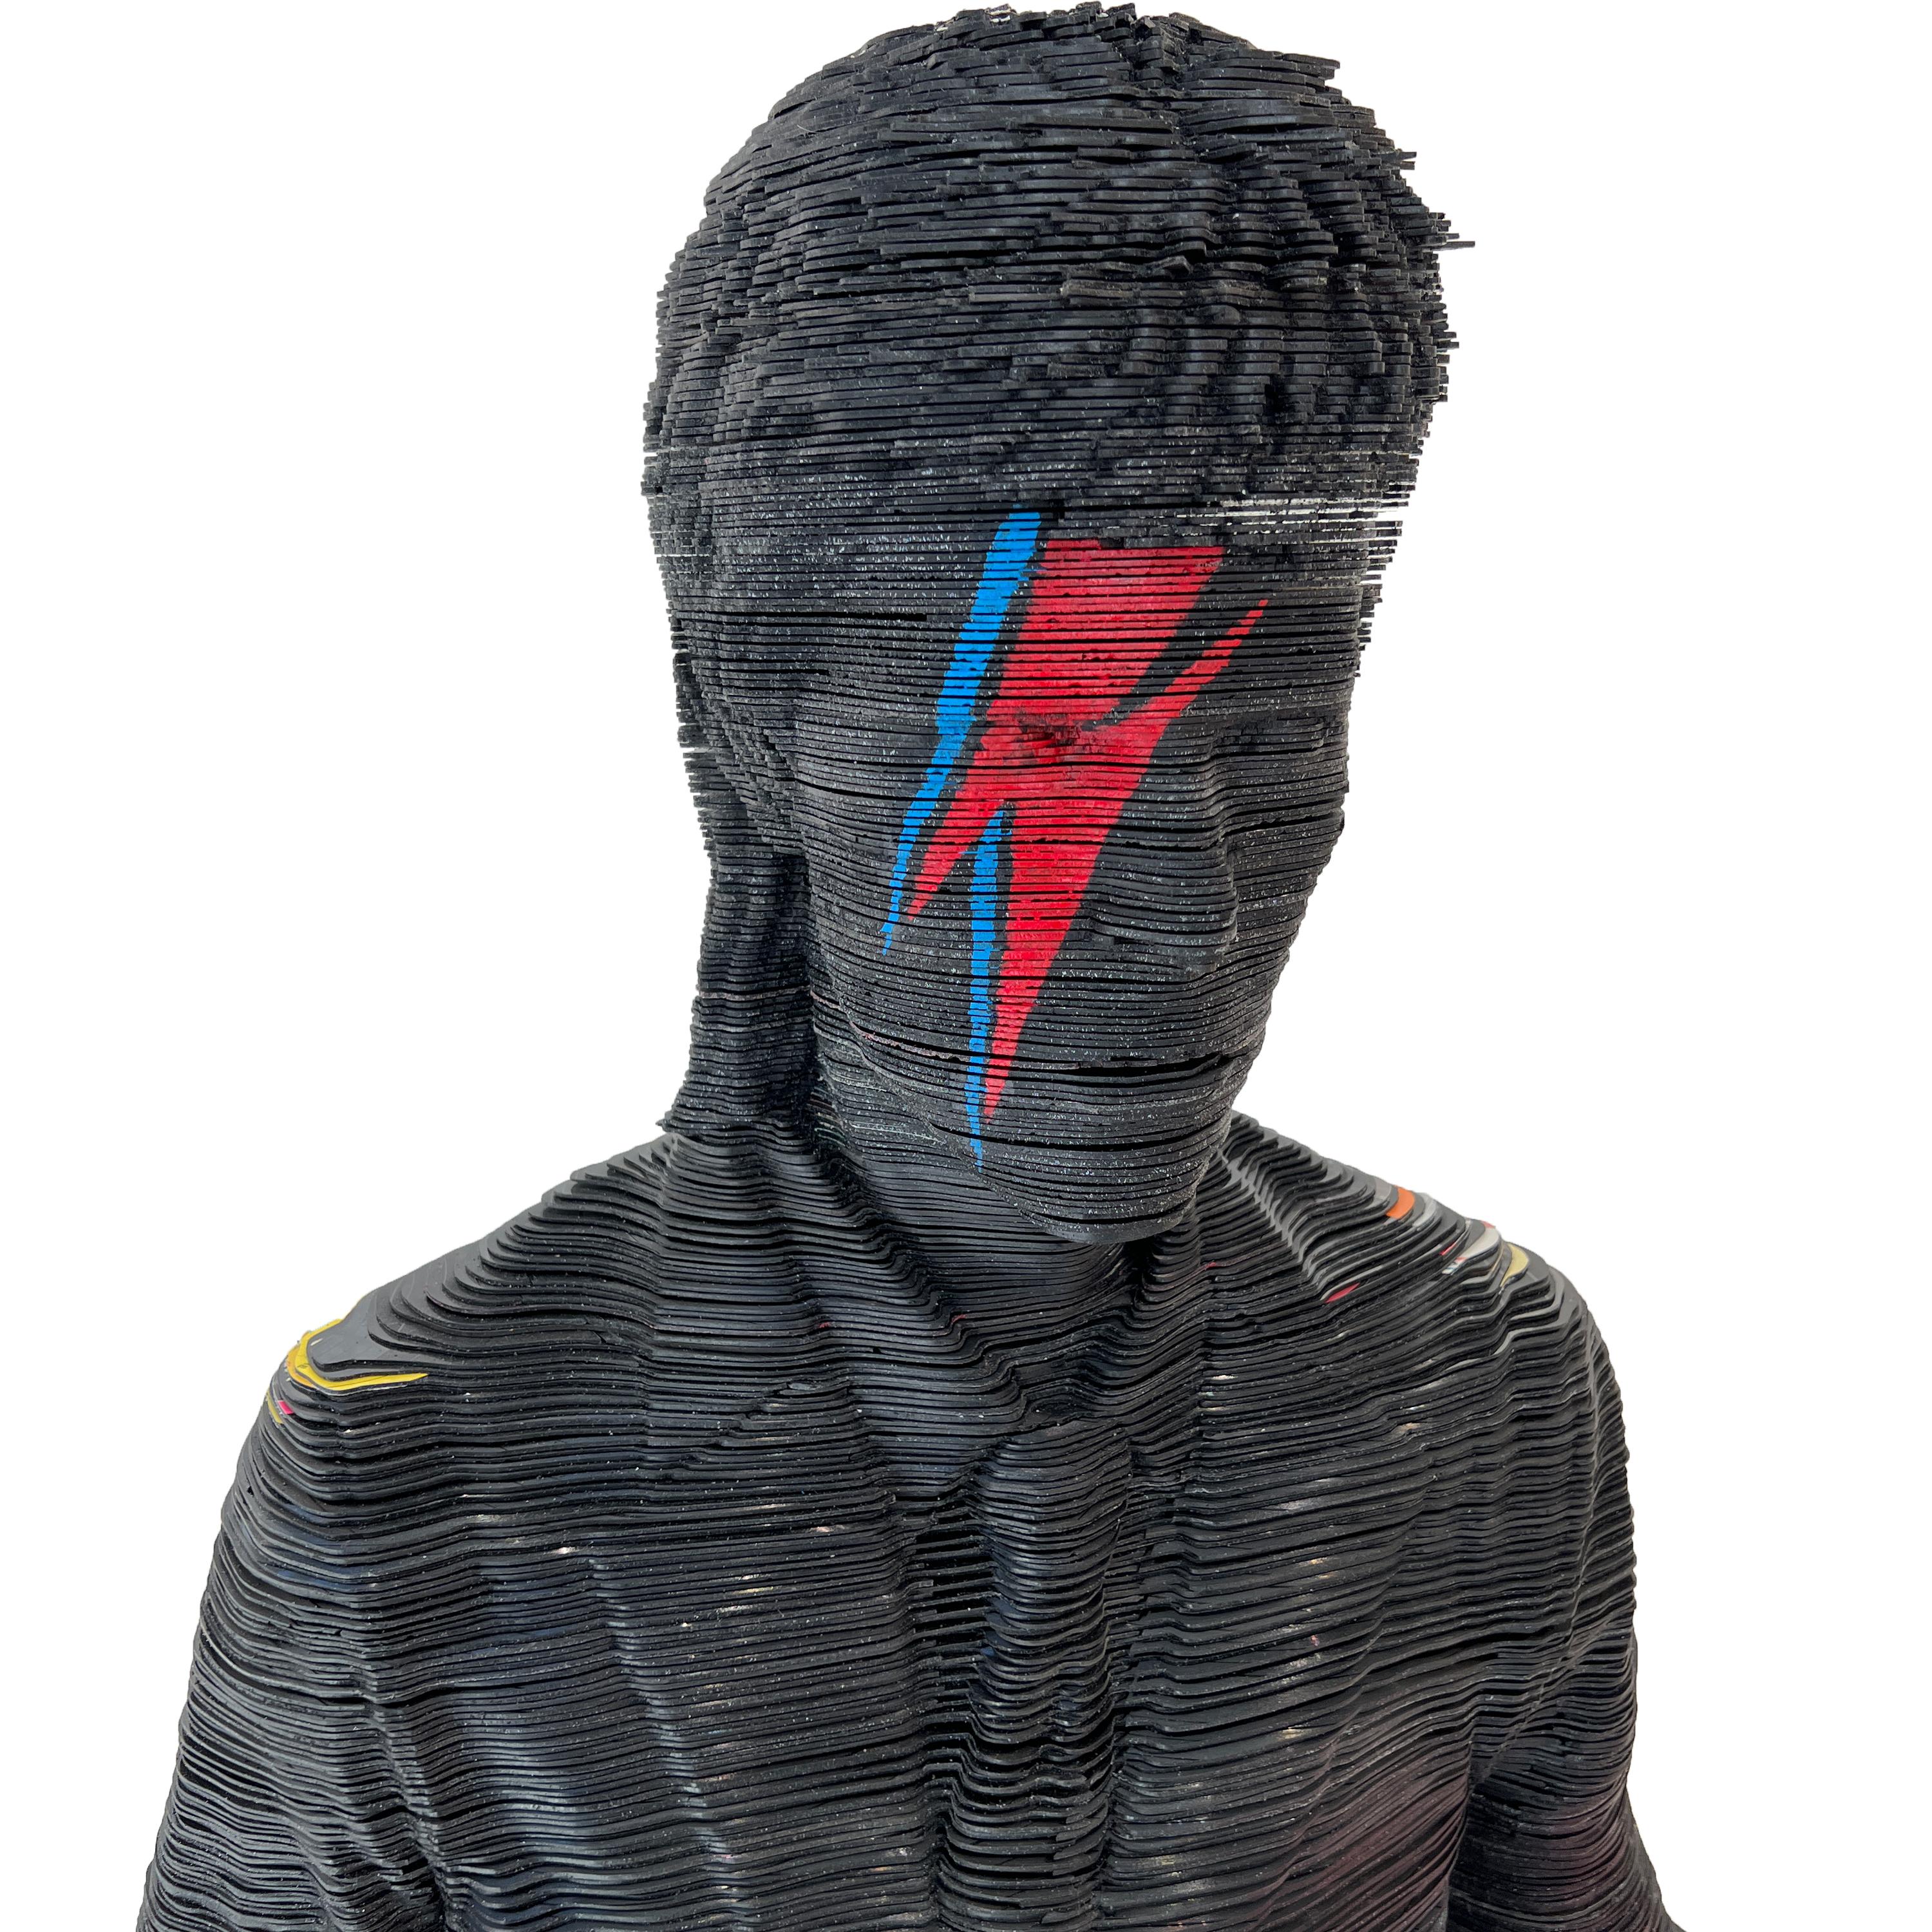 David Bowie, Vinyl Records  - Contemporary Mixed Media Art by Georges Monfils